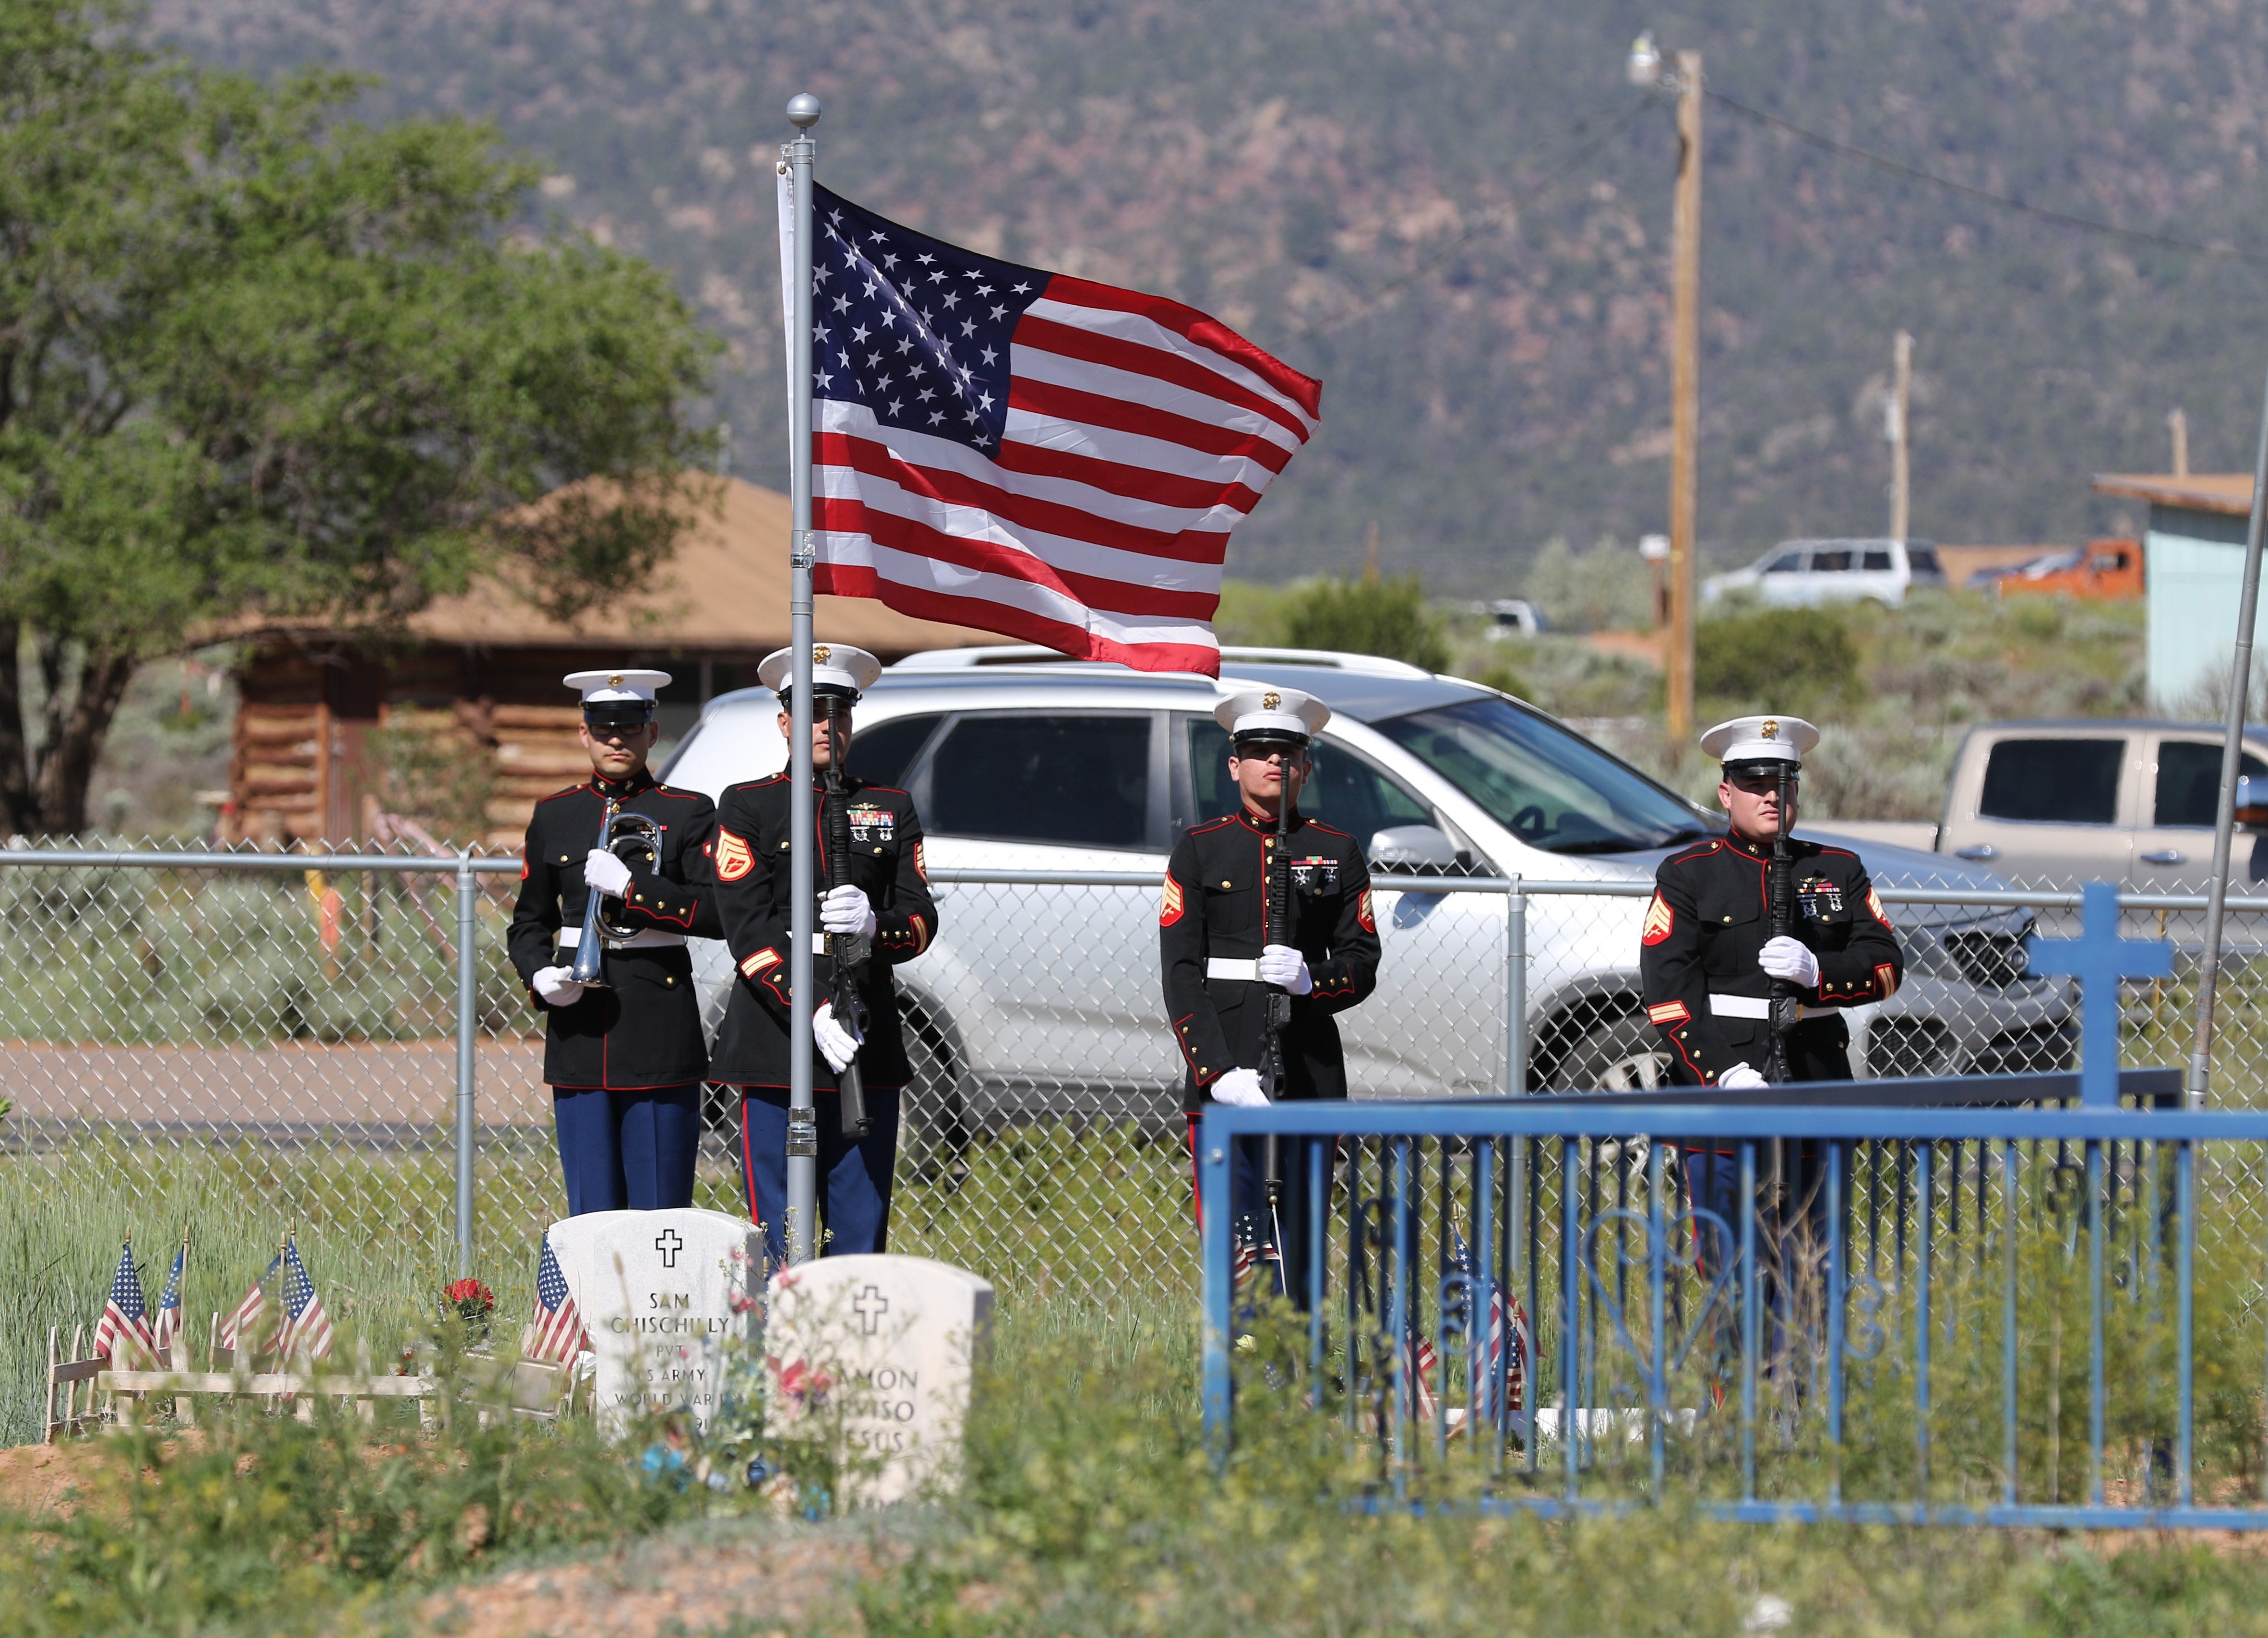 Members of the U.S. Marine Corps Delta Company, 4th Recon from Albuquerque wait to perform a rifle detail and the playing of taps at the June 6 memorial service for Navajo Code Talker William Tully Brown Sr. at the Fort Defiance Veterans Cemetery in Fort Defiance, Ariz.